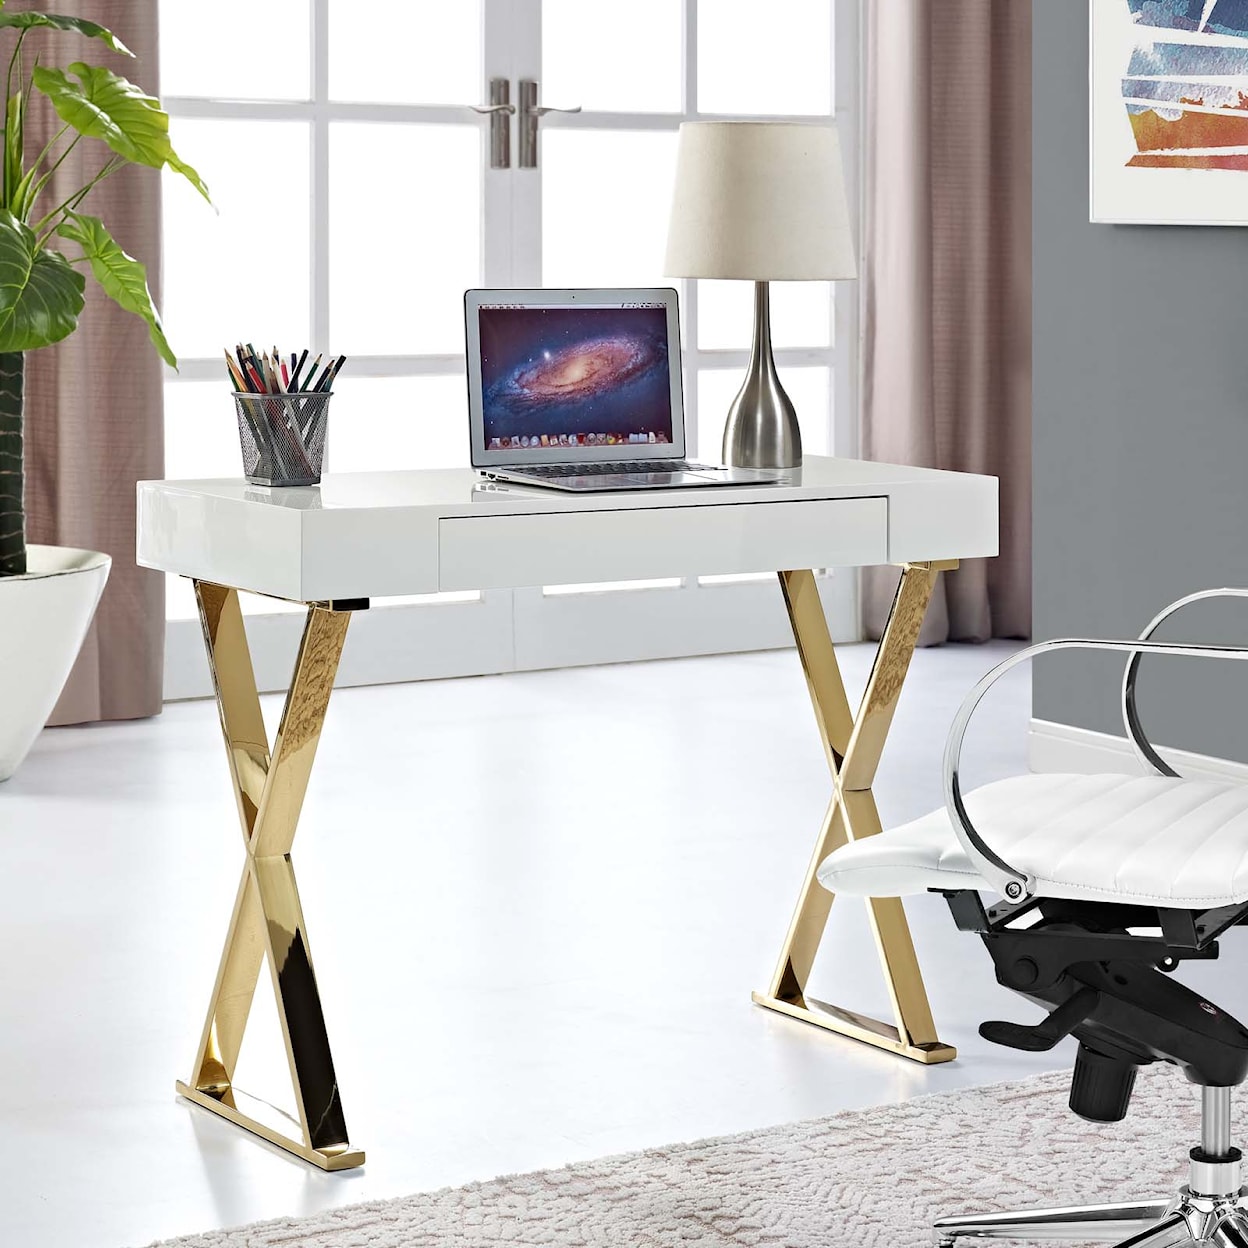 Modway Sector Console Table